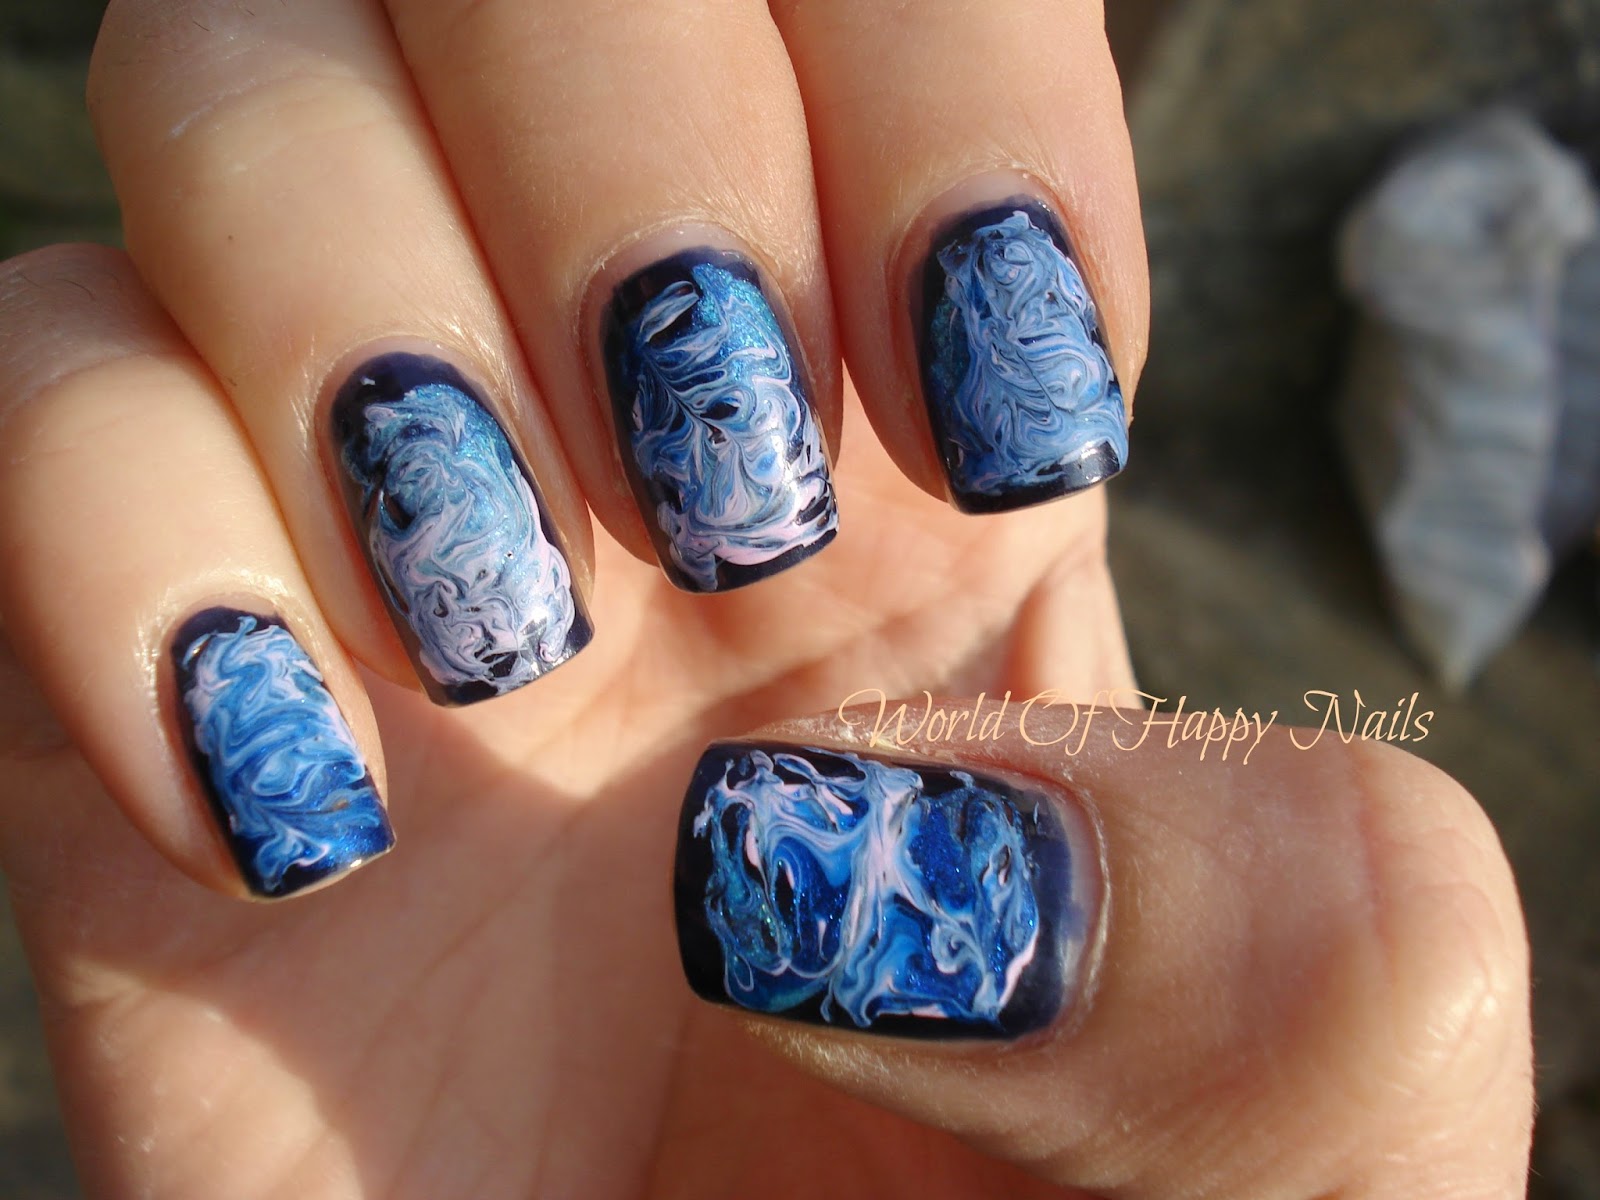 World Of Happy Nails: Matching Manicures #35 - Dry Marble